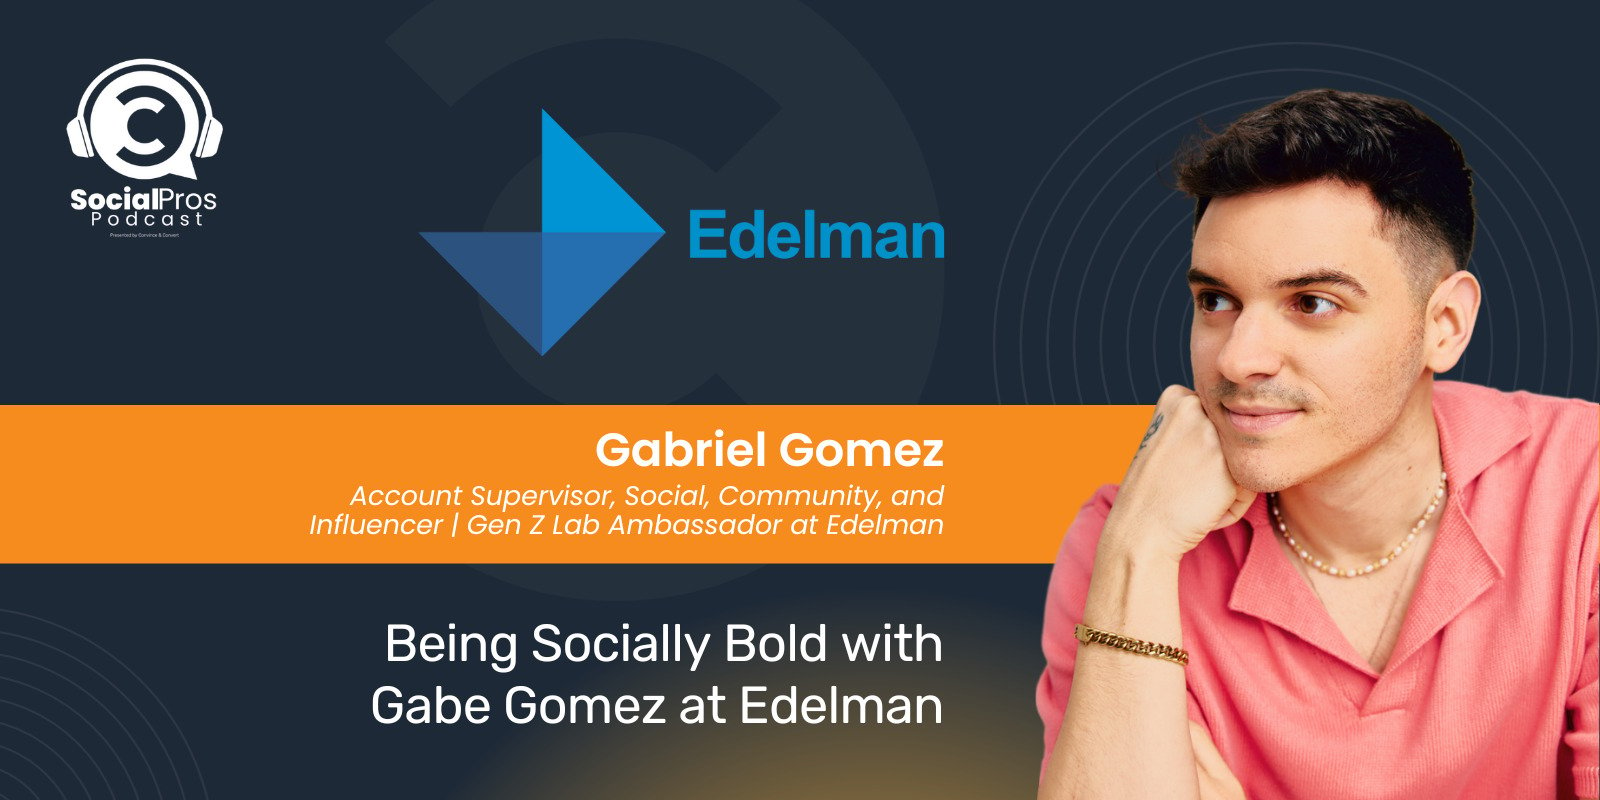 Being Socially Bold with Gabe Gomez at Edelman